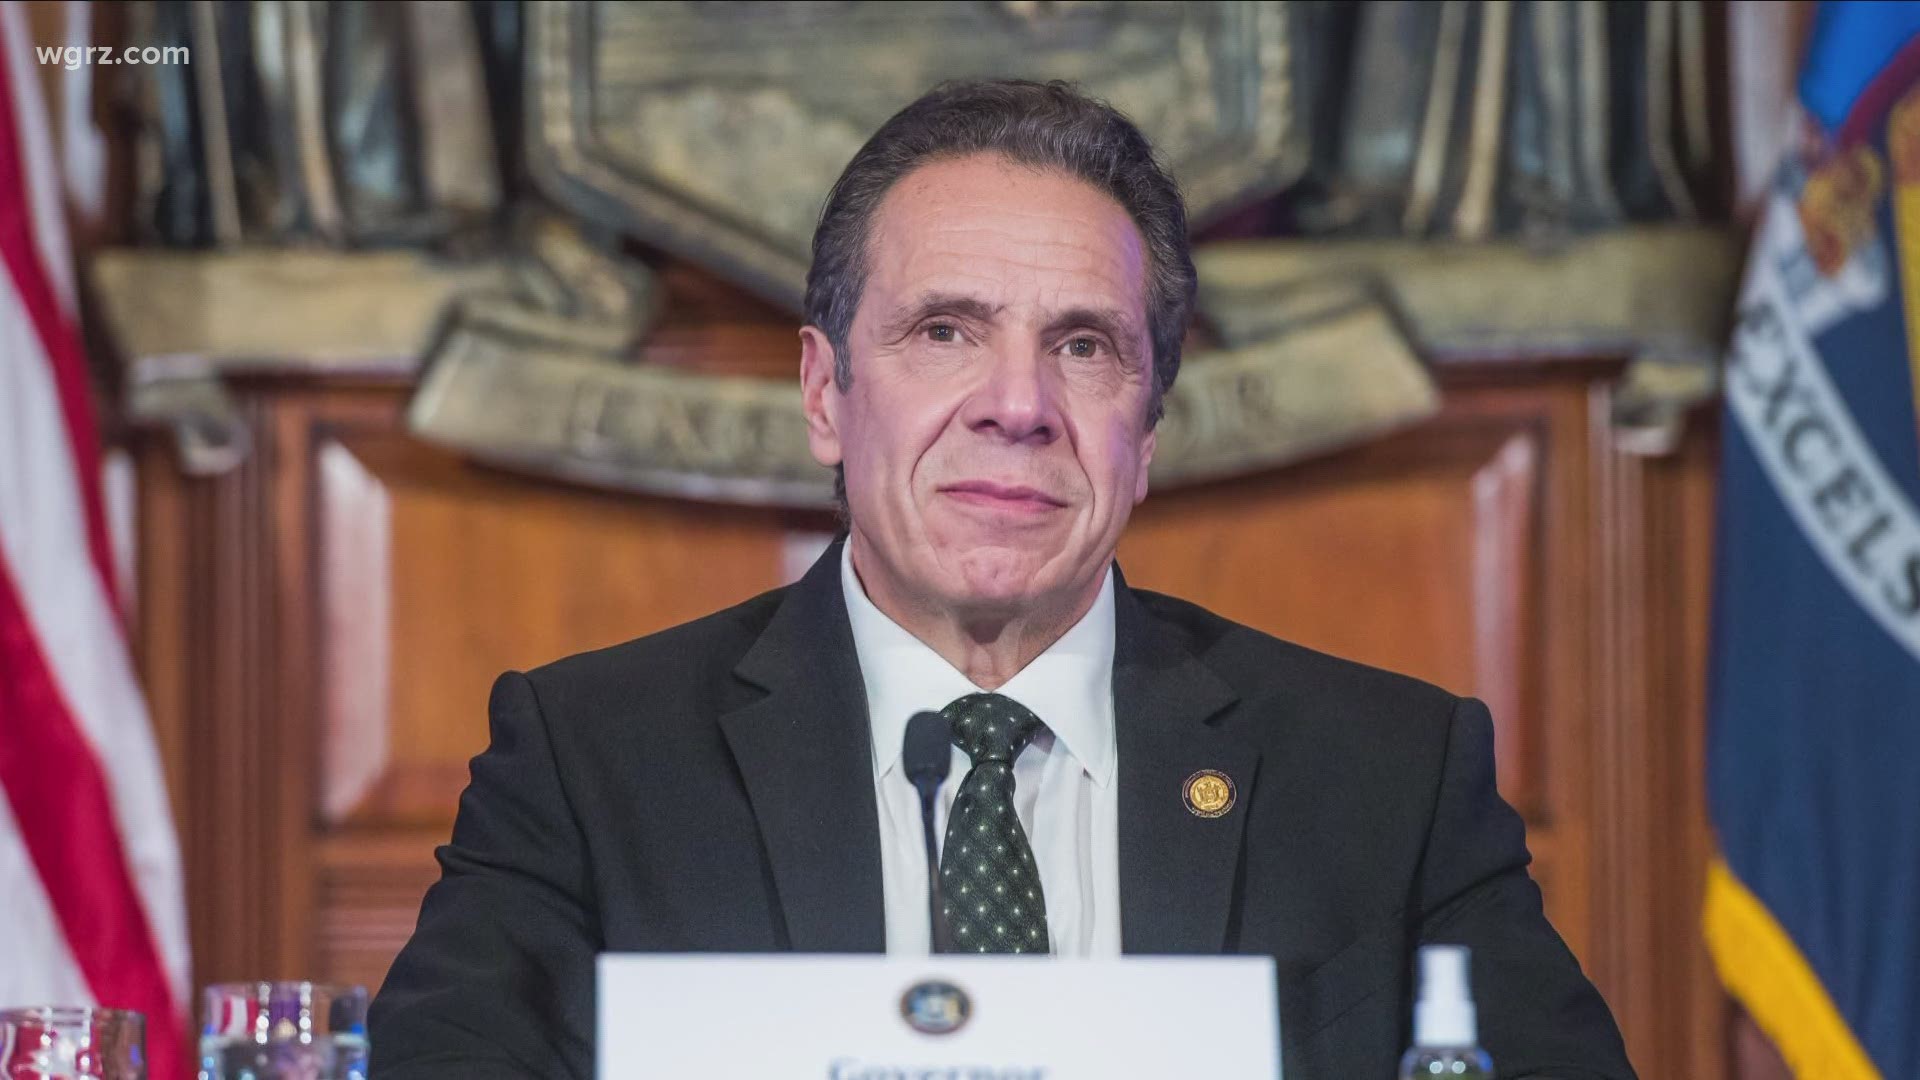 Our Verify Team looks into Andrew Cuomo statements made by the governor yesterday